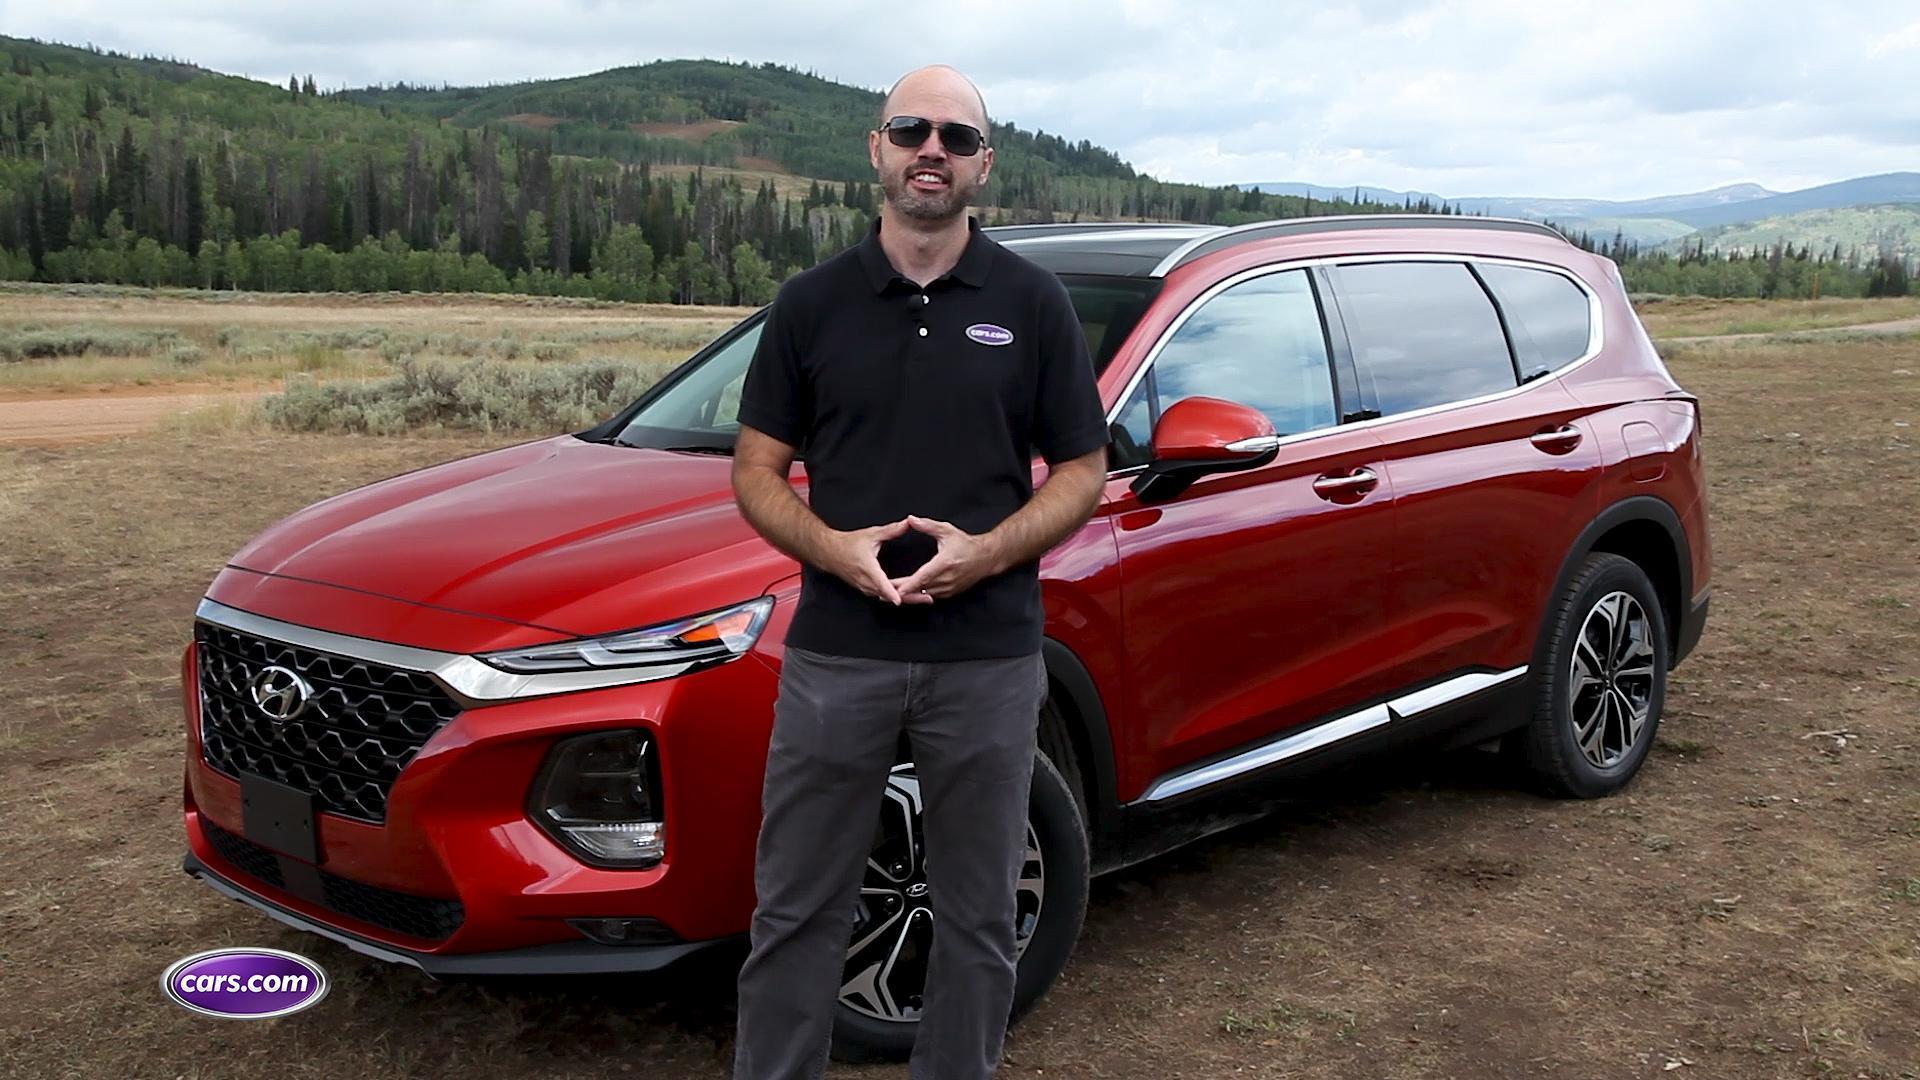 What's Changed for the 2023 Hyundai Santa Fe?